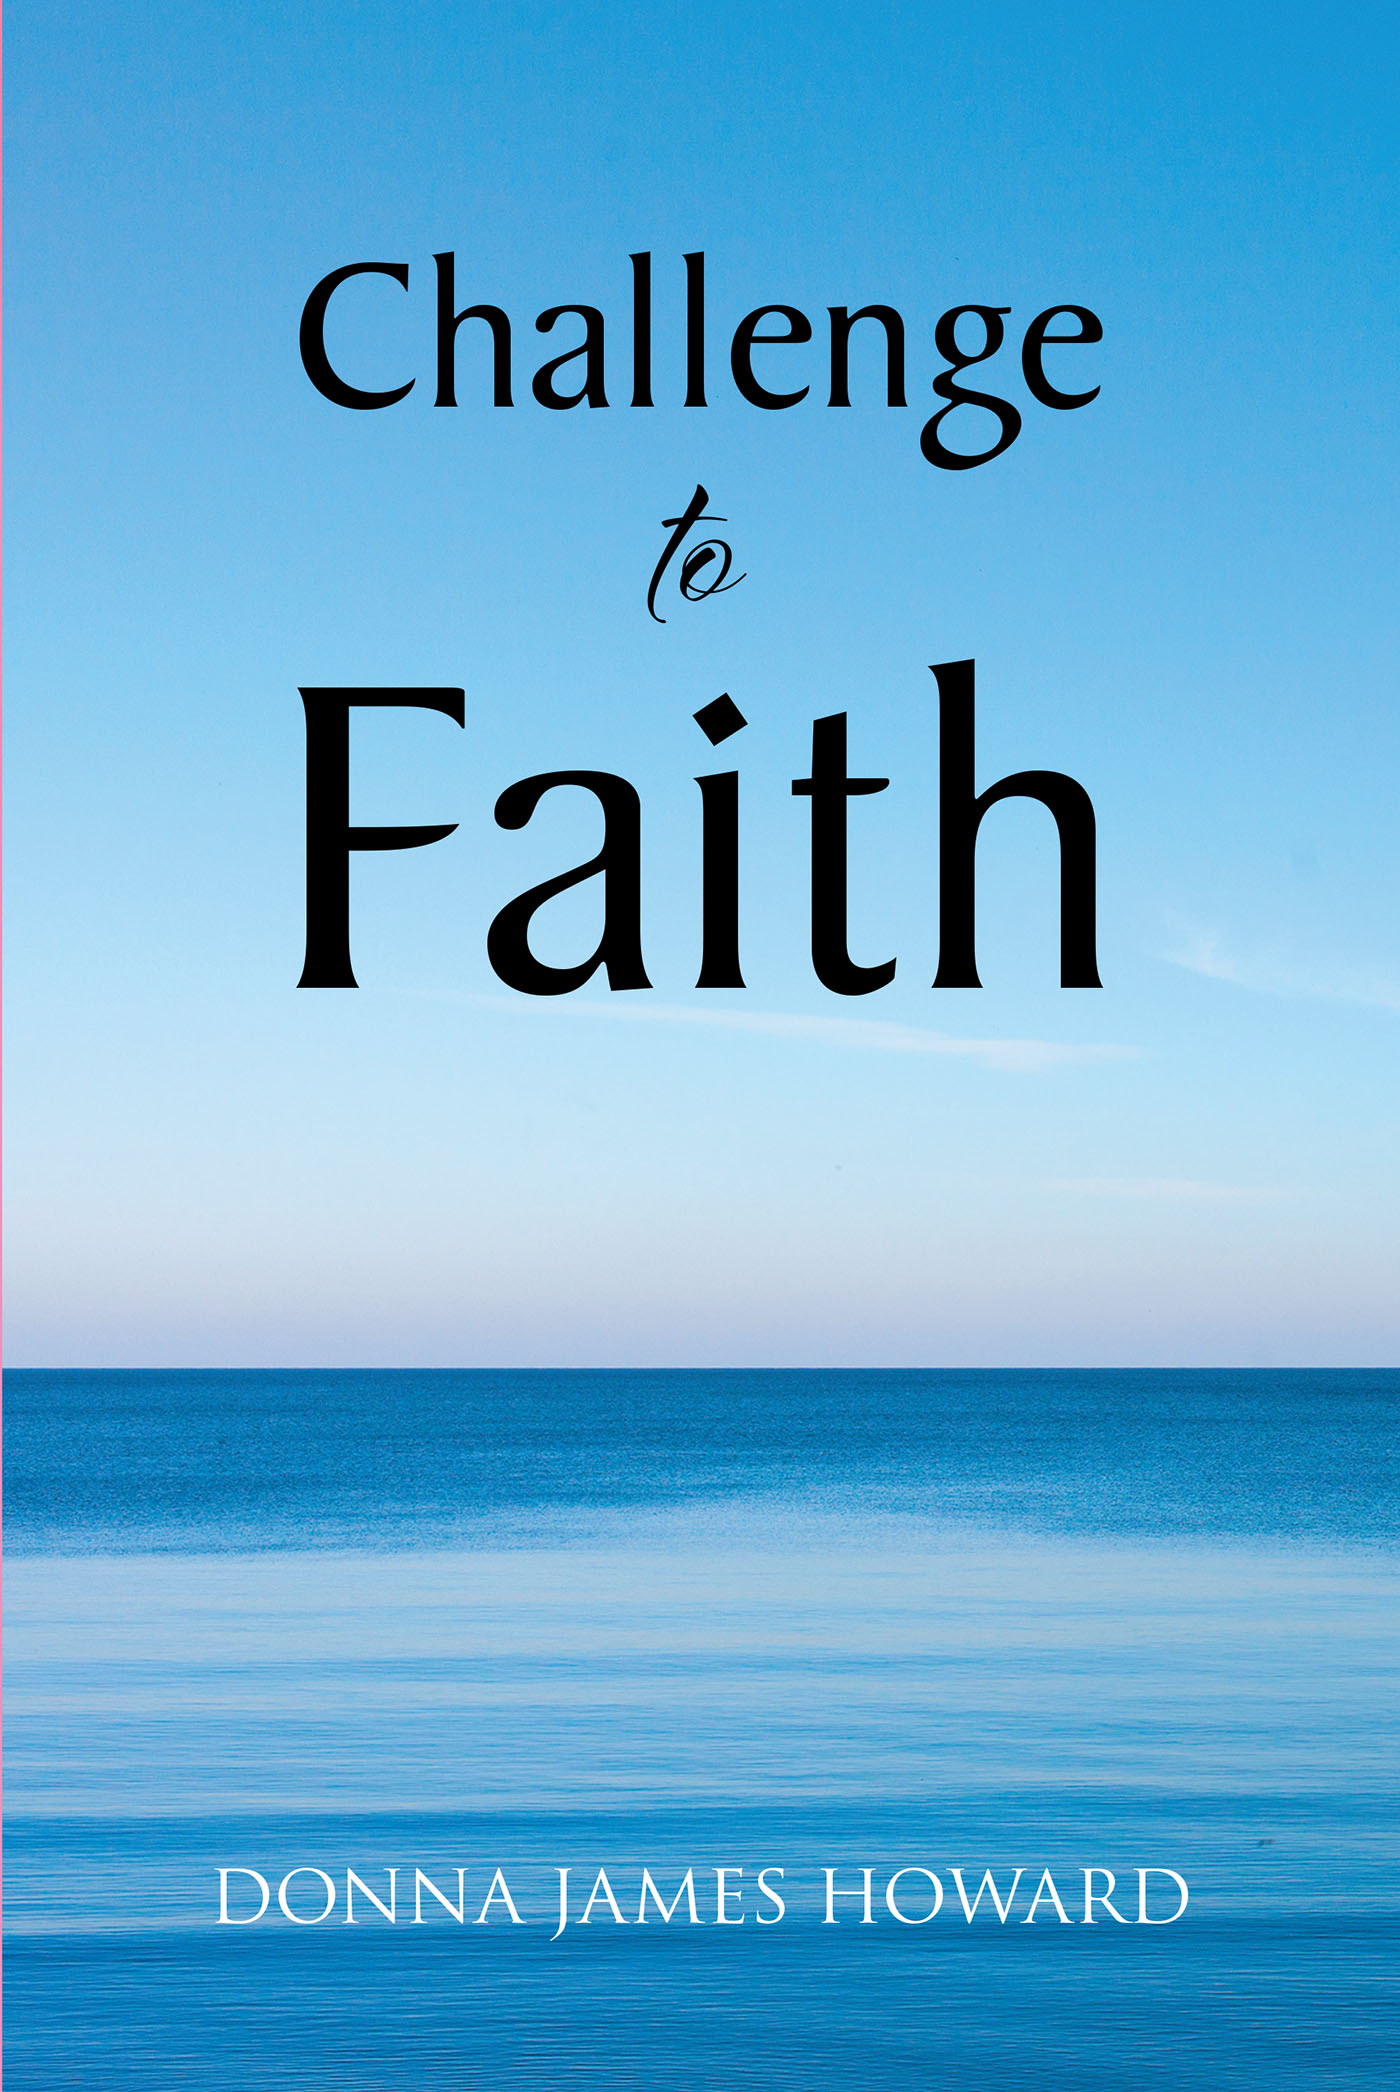 Donna James Howard’s Newly Released "Challenge to Faith" is a Thoughtful Collection of Poetry and Prose That Push Readers to Consider the Relevance of God